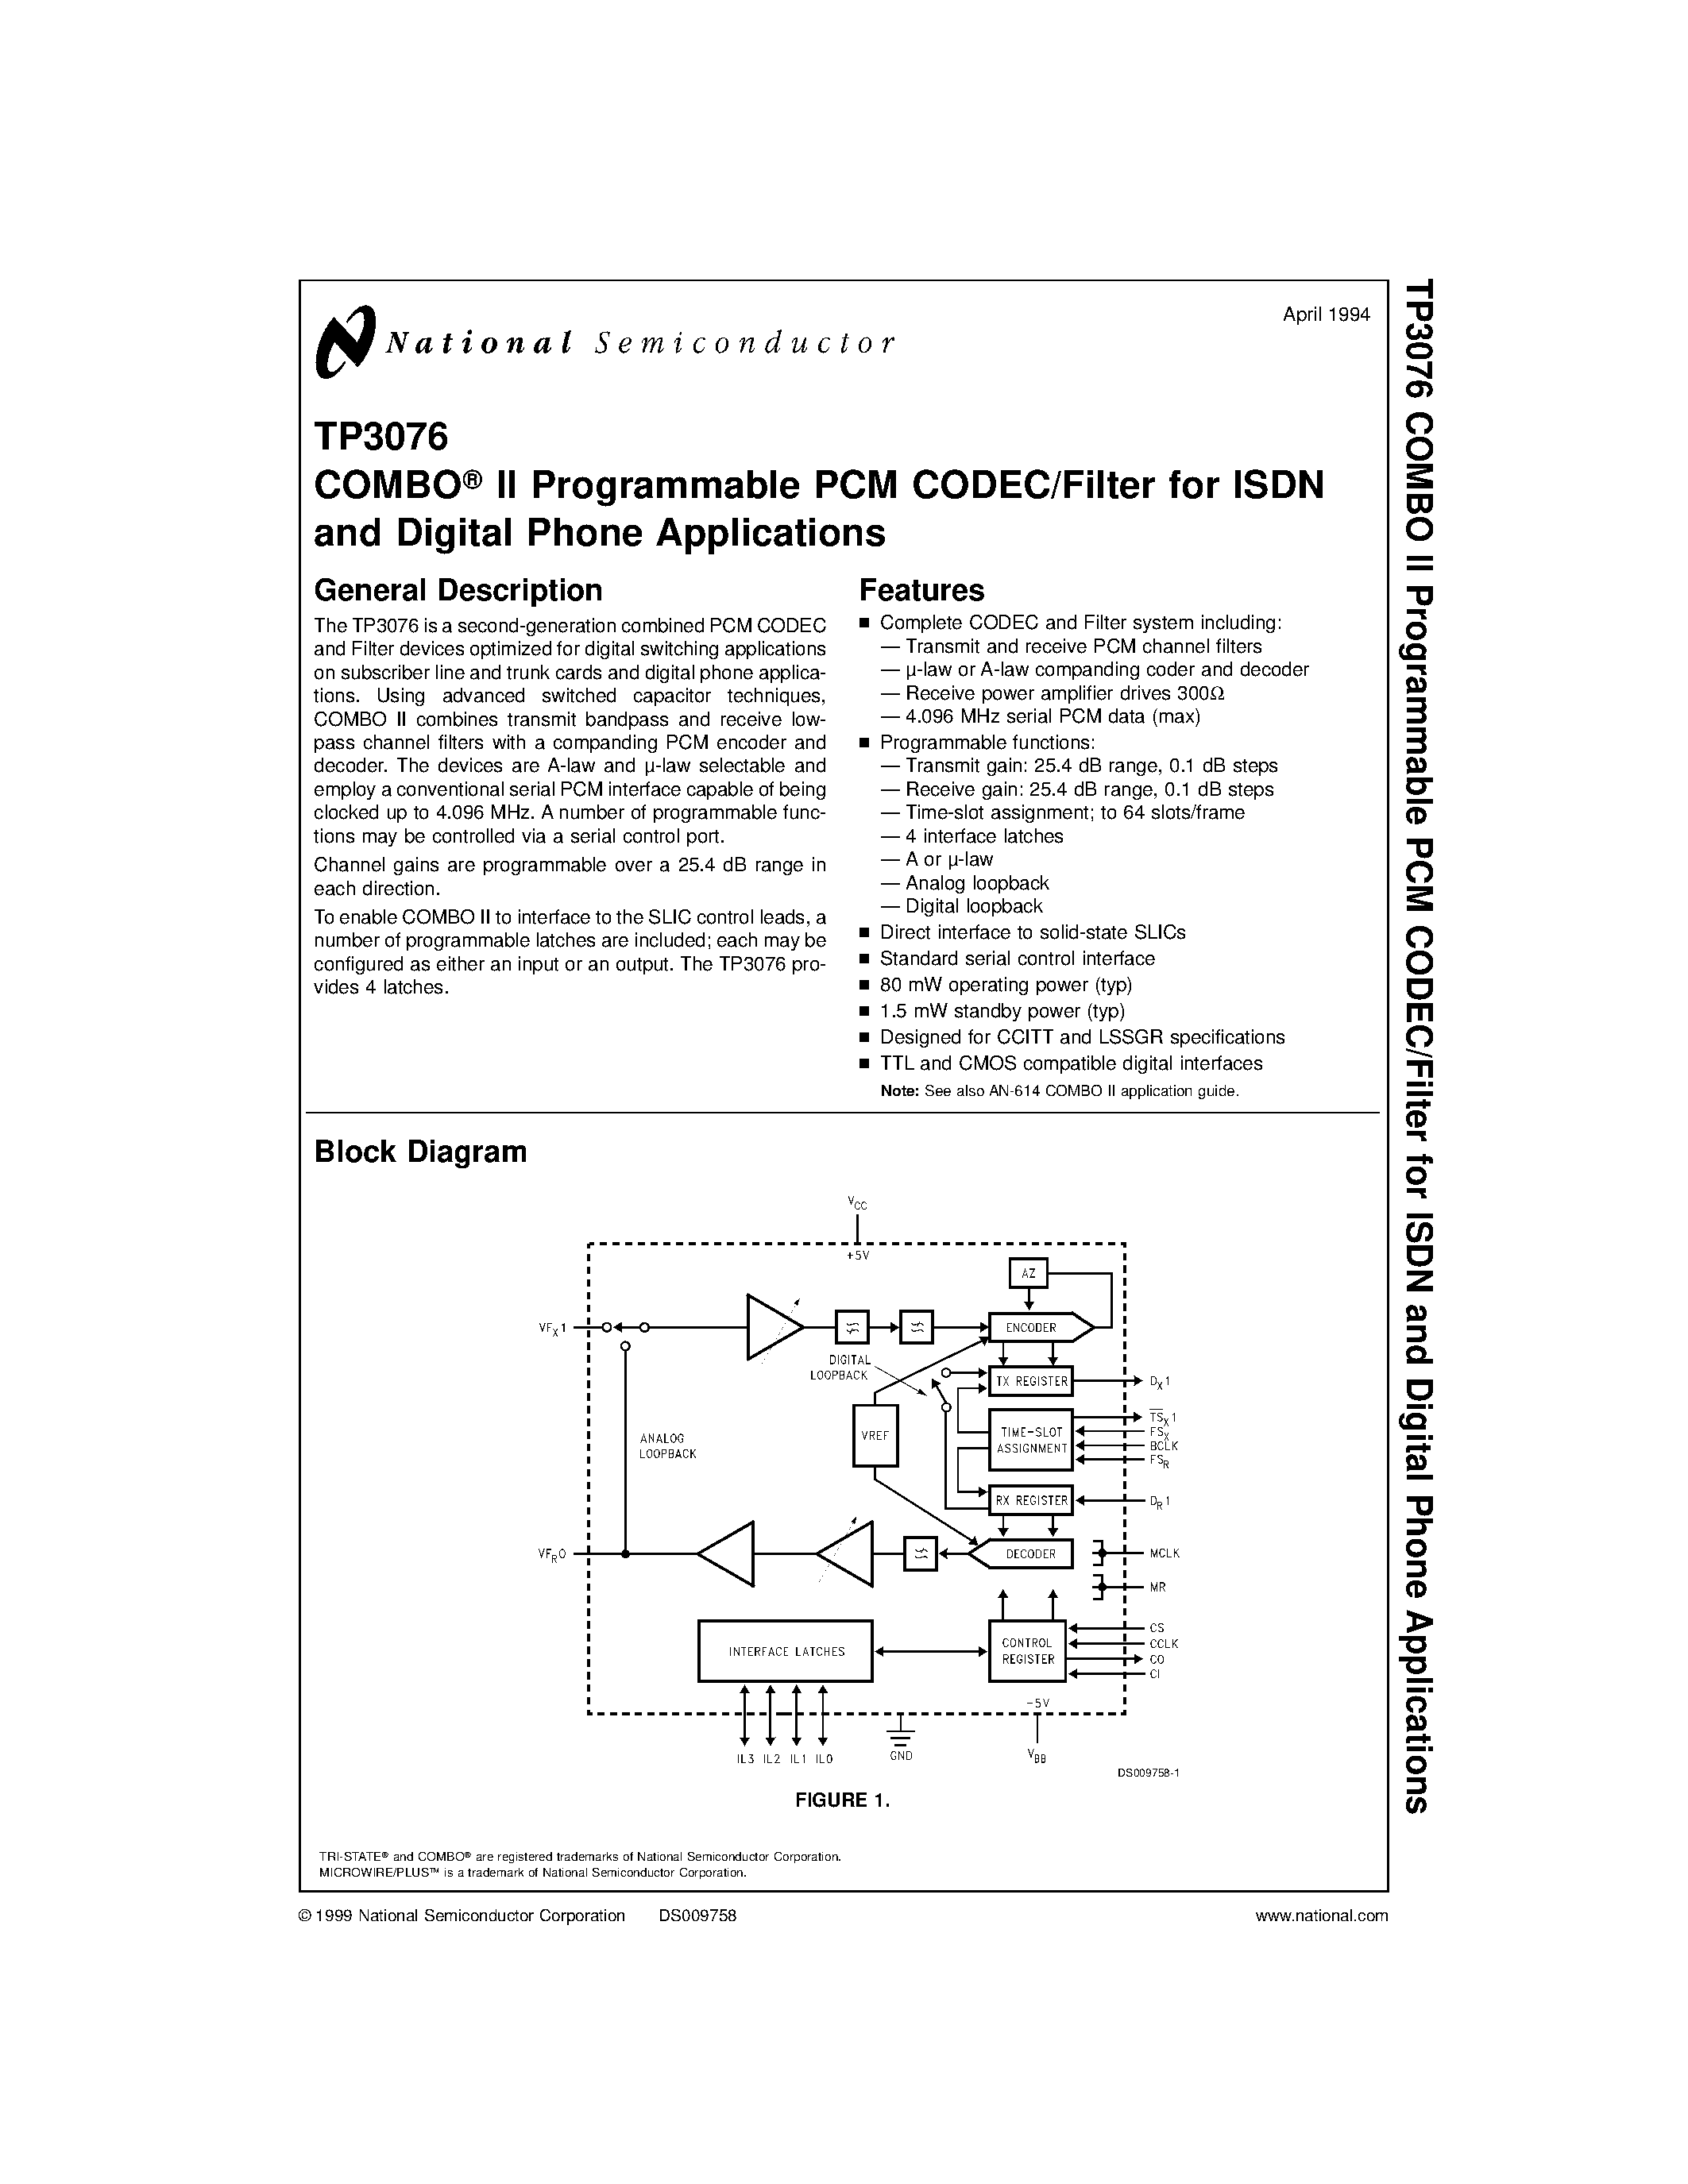 Даташит TP3076J - COMBO II Programmable PCM CODEC/Filter for ISDN and Digital Phone Applications страница 1